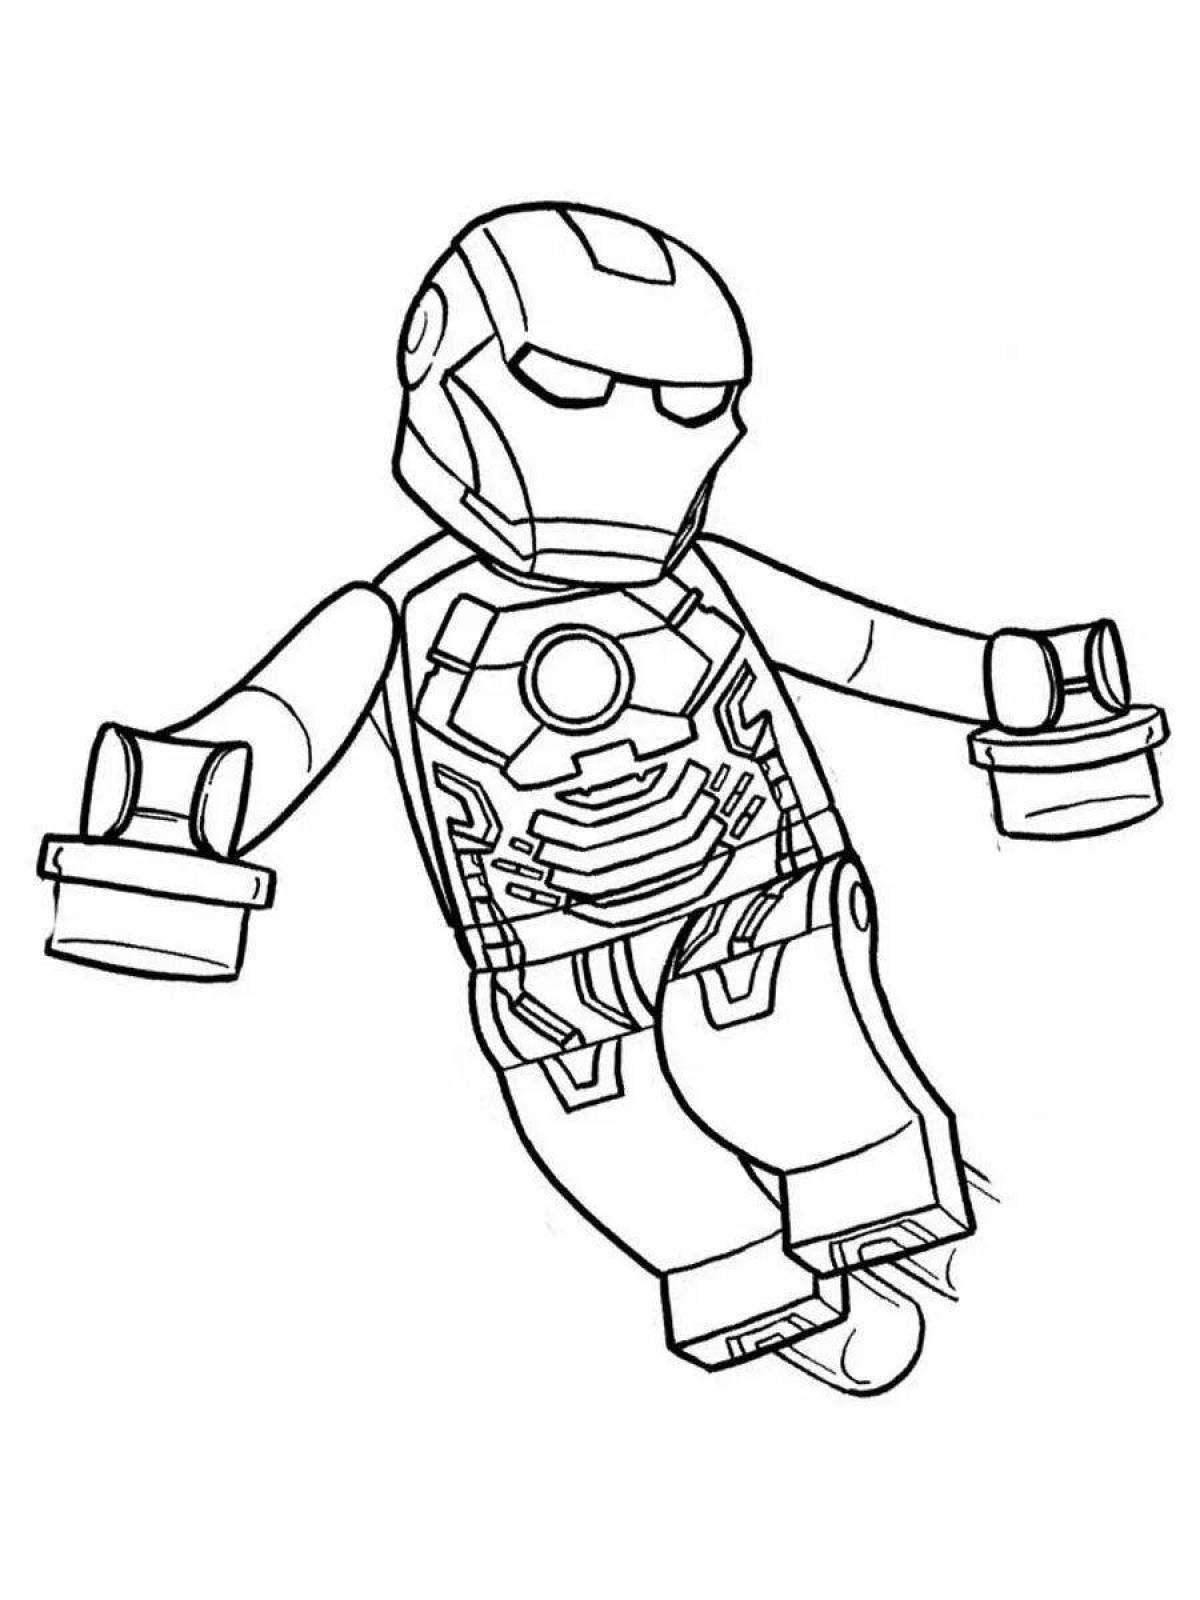 Exciting coloring lego flash